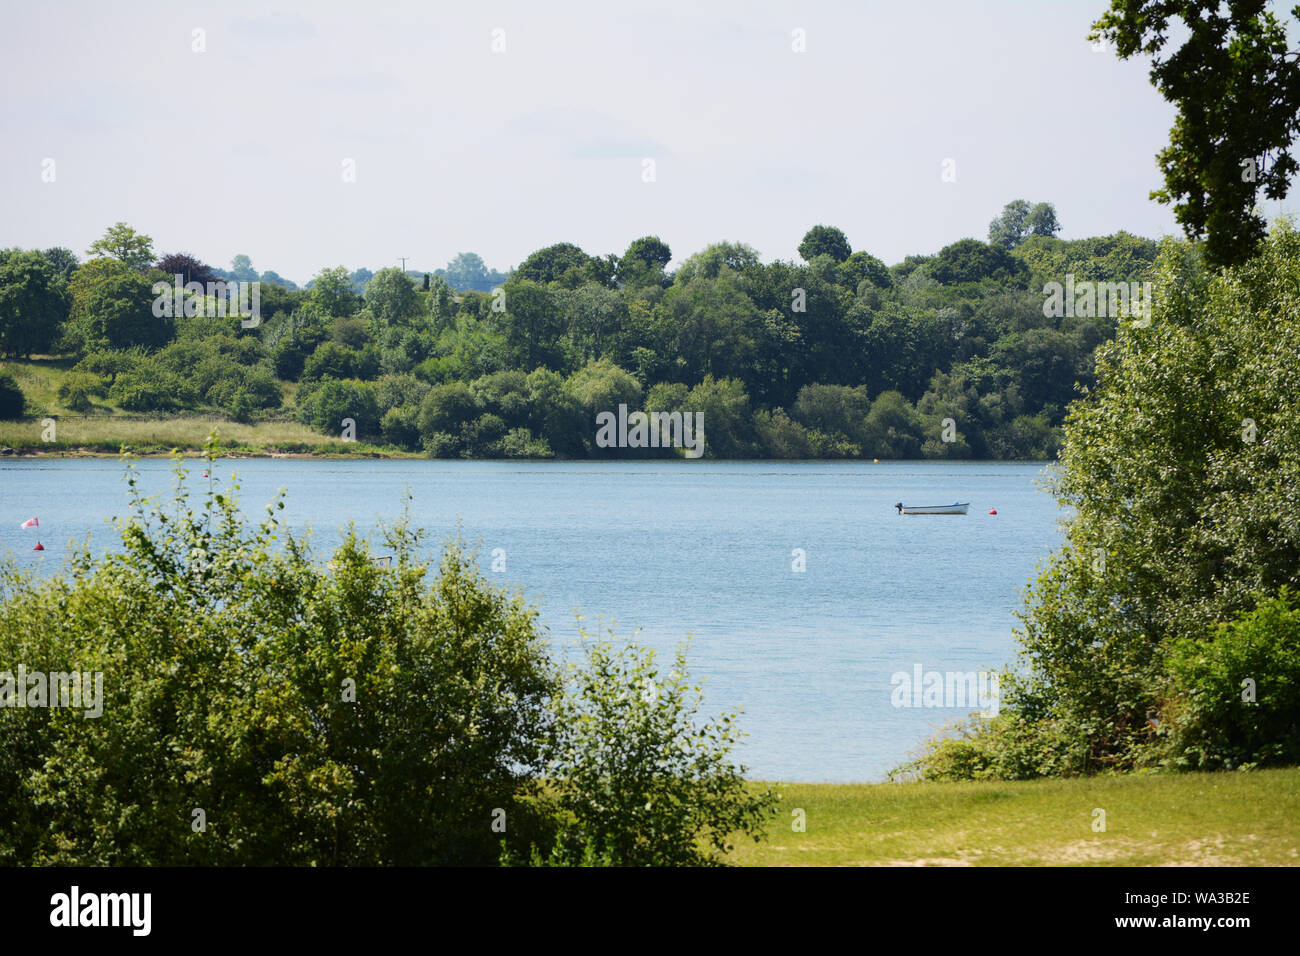 Small boat on Bewl Water reservoir in Tunbridge Wells, Kent. Verdant trees and bushes grow at the water's edge. Stock Photo